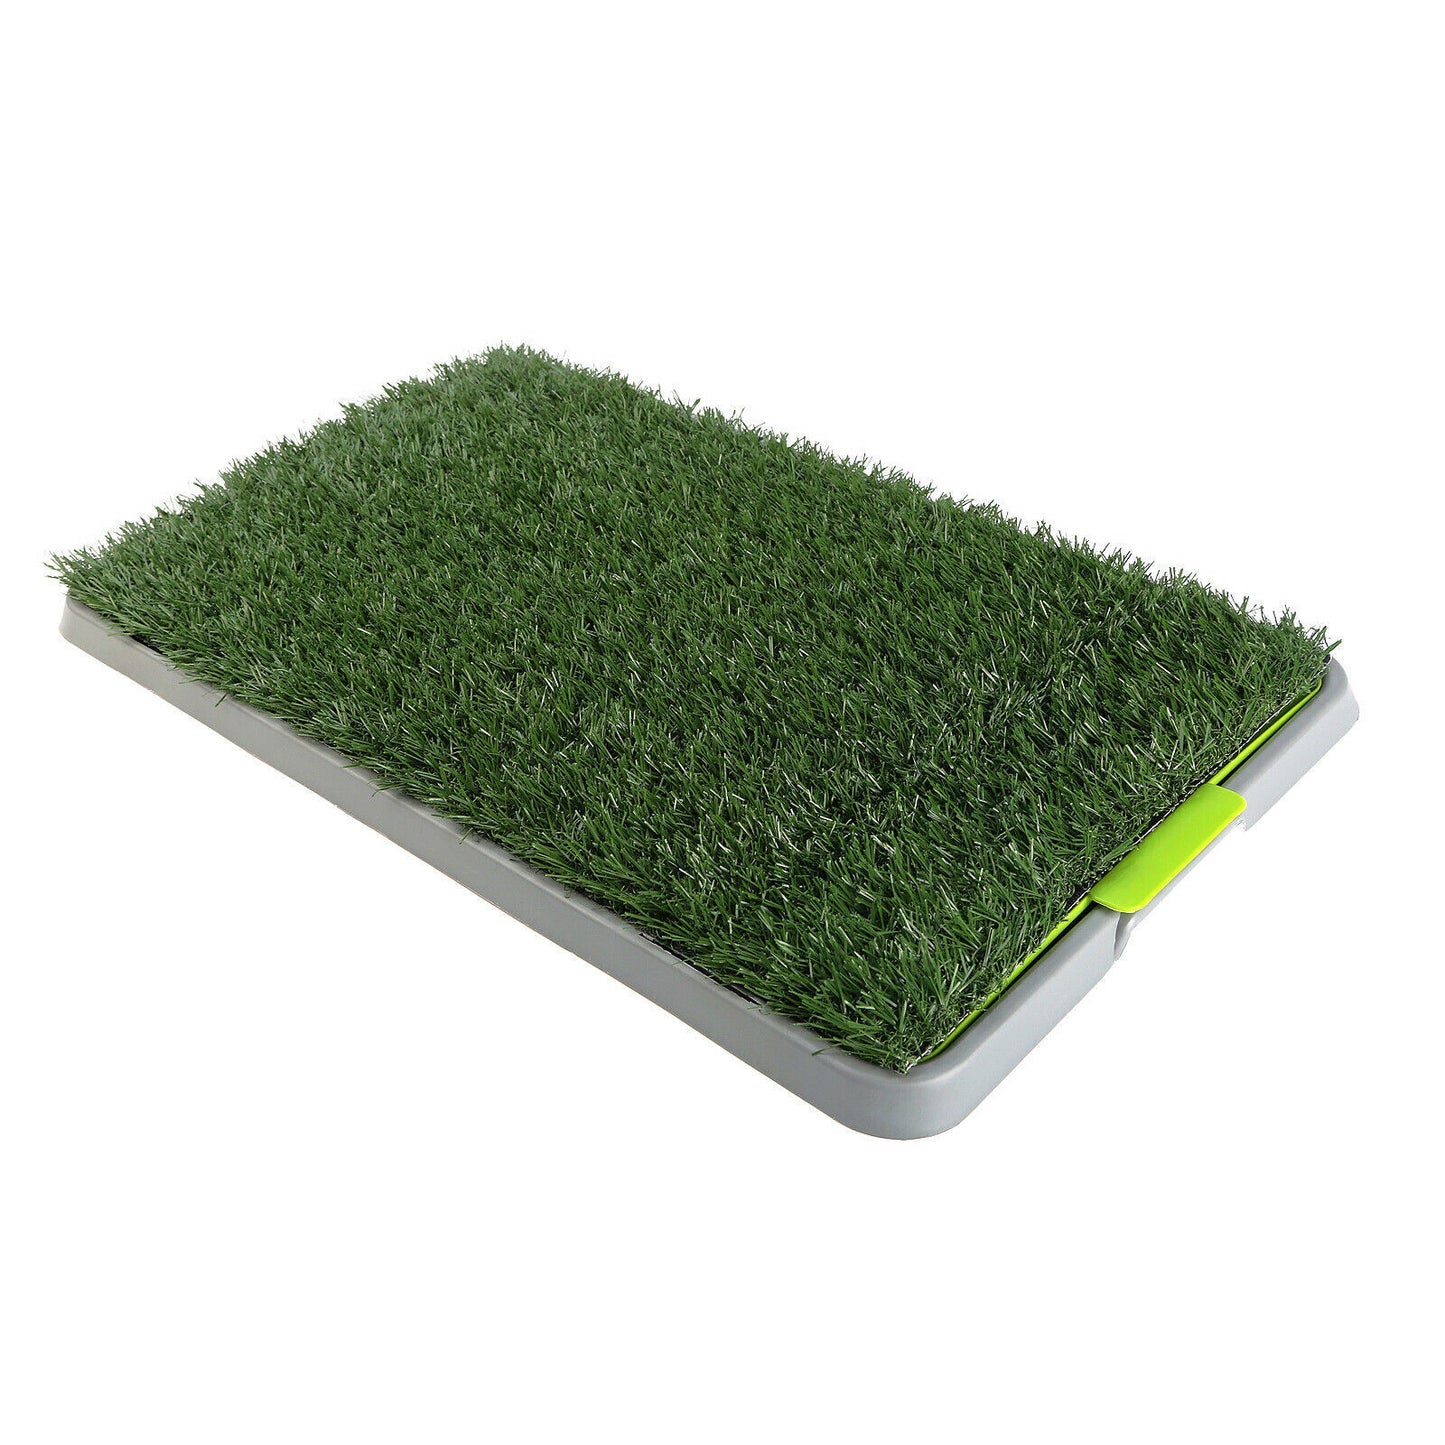 4 x Grass replacement only for Dog Potty Pad 64 X 39 cm